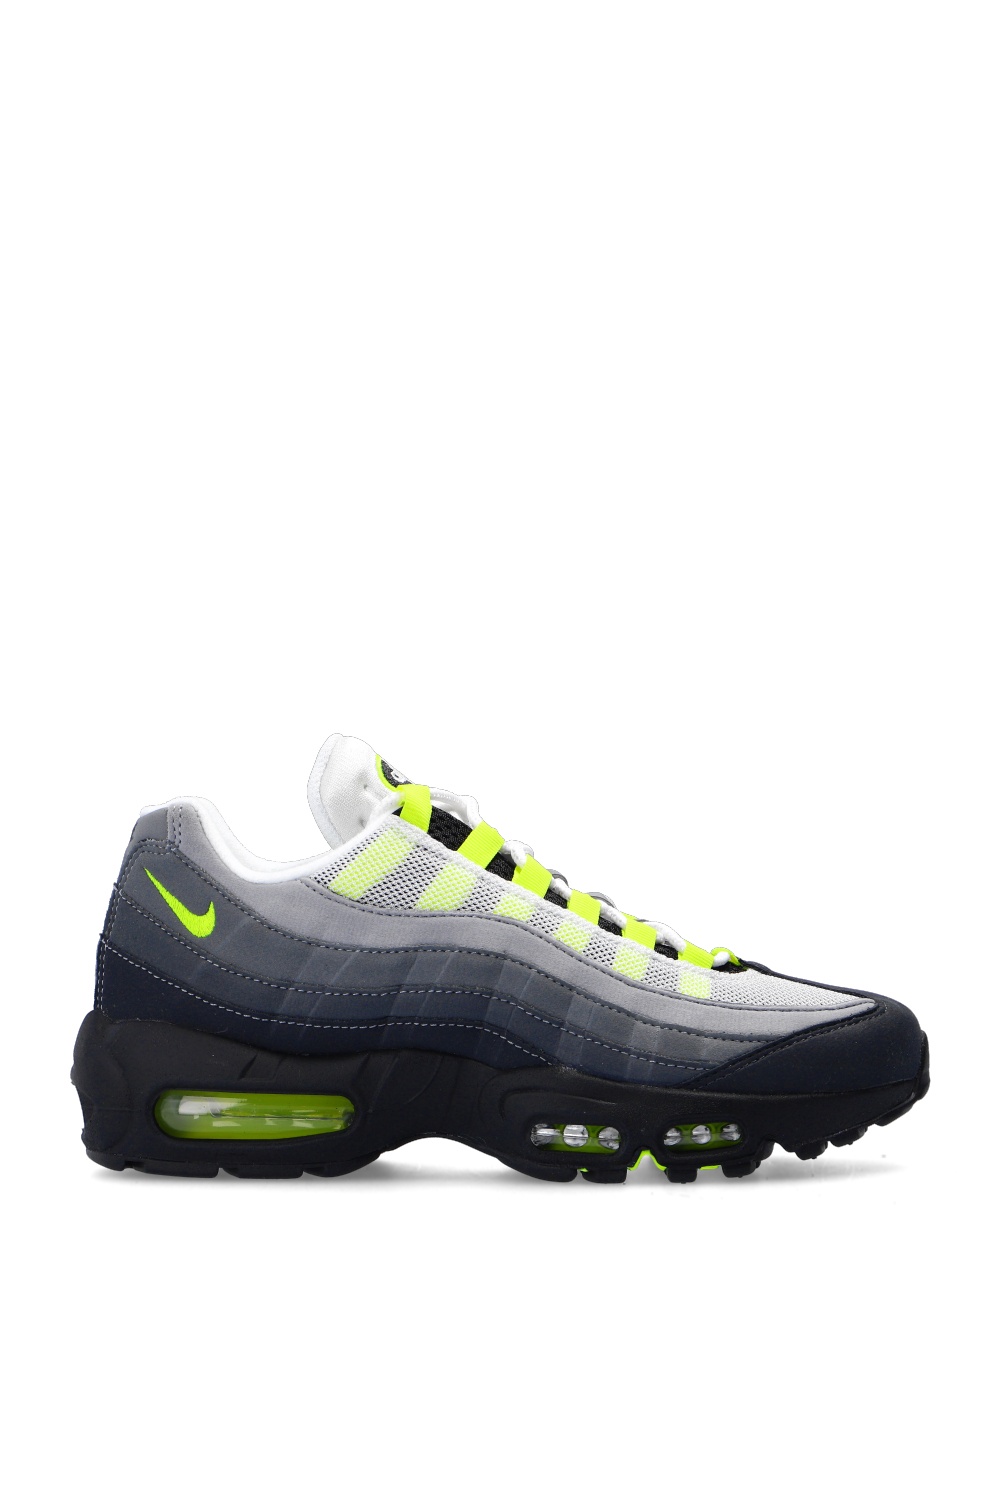 air max 95 size guide